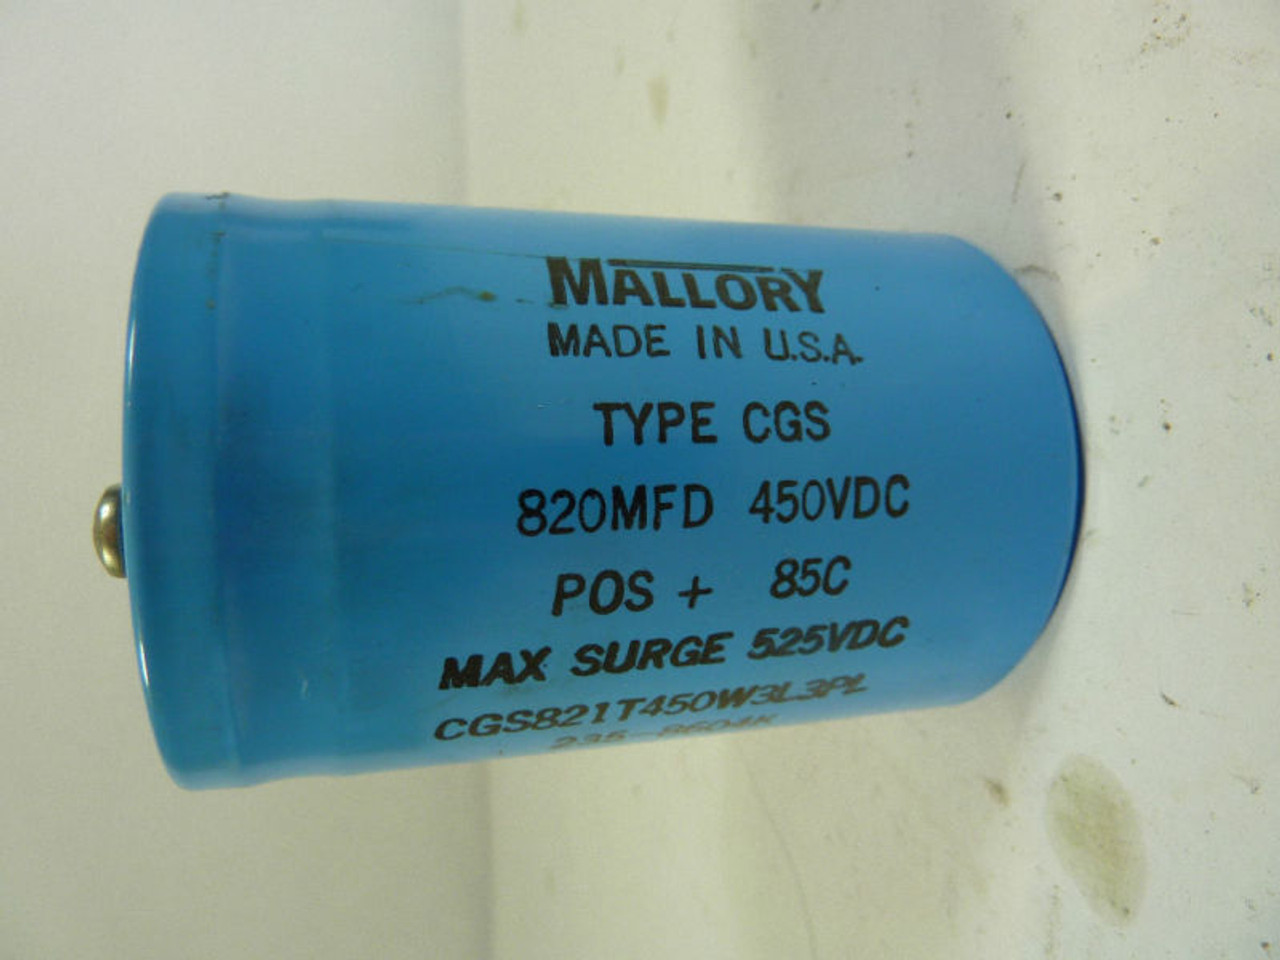 Mallory CGS821T450W3L3PL Capacitor 525VDC USED